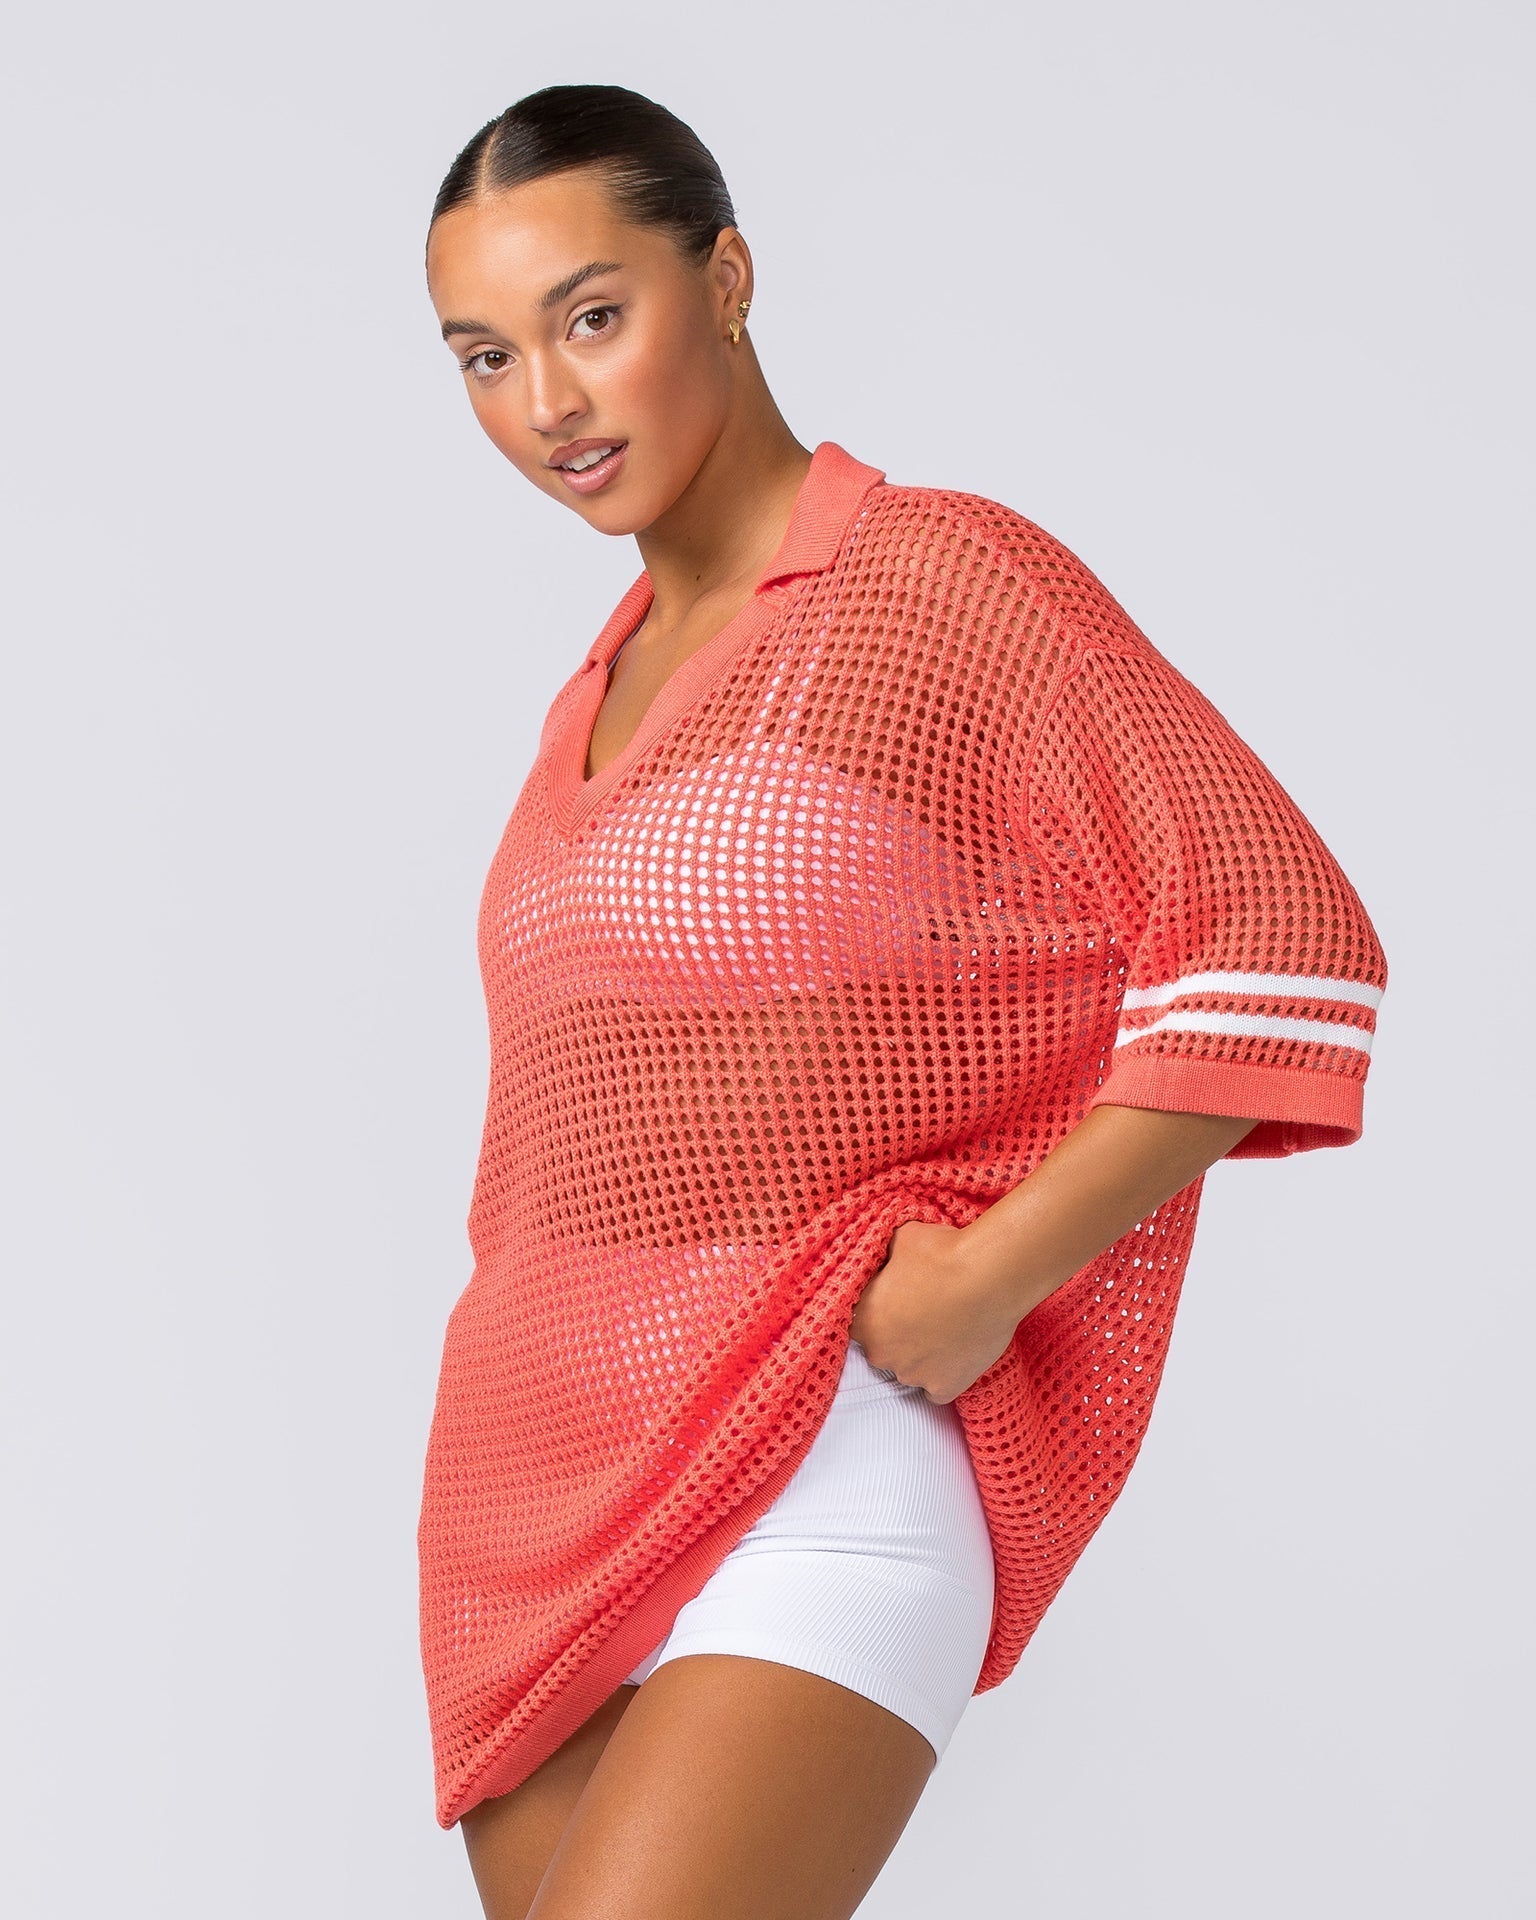 Muscle Nation T-Shirts Oversized Knit Jersey - Coral